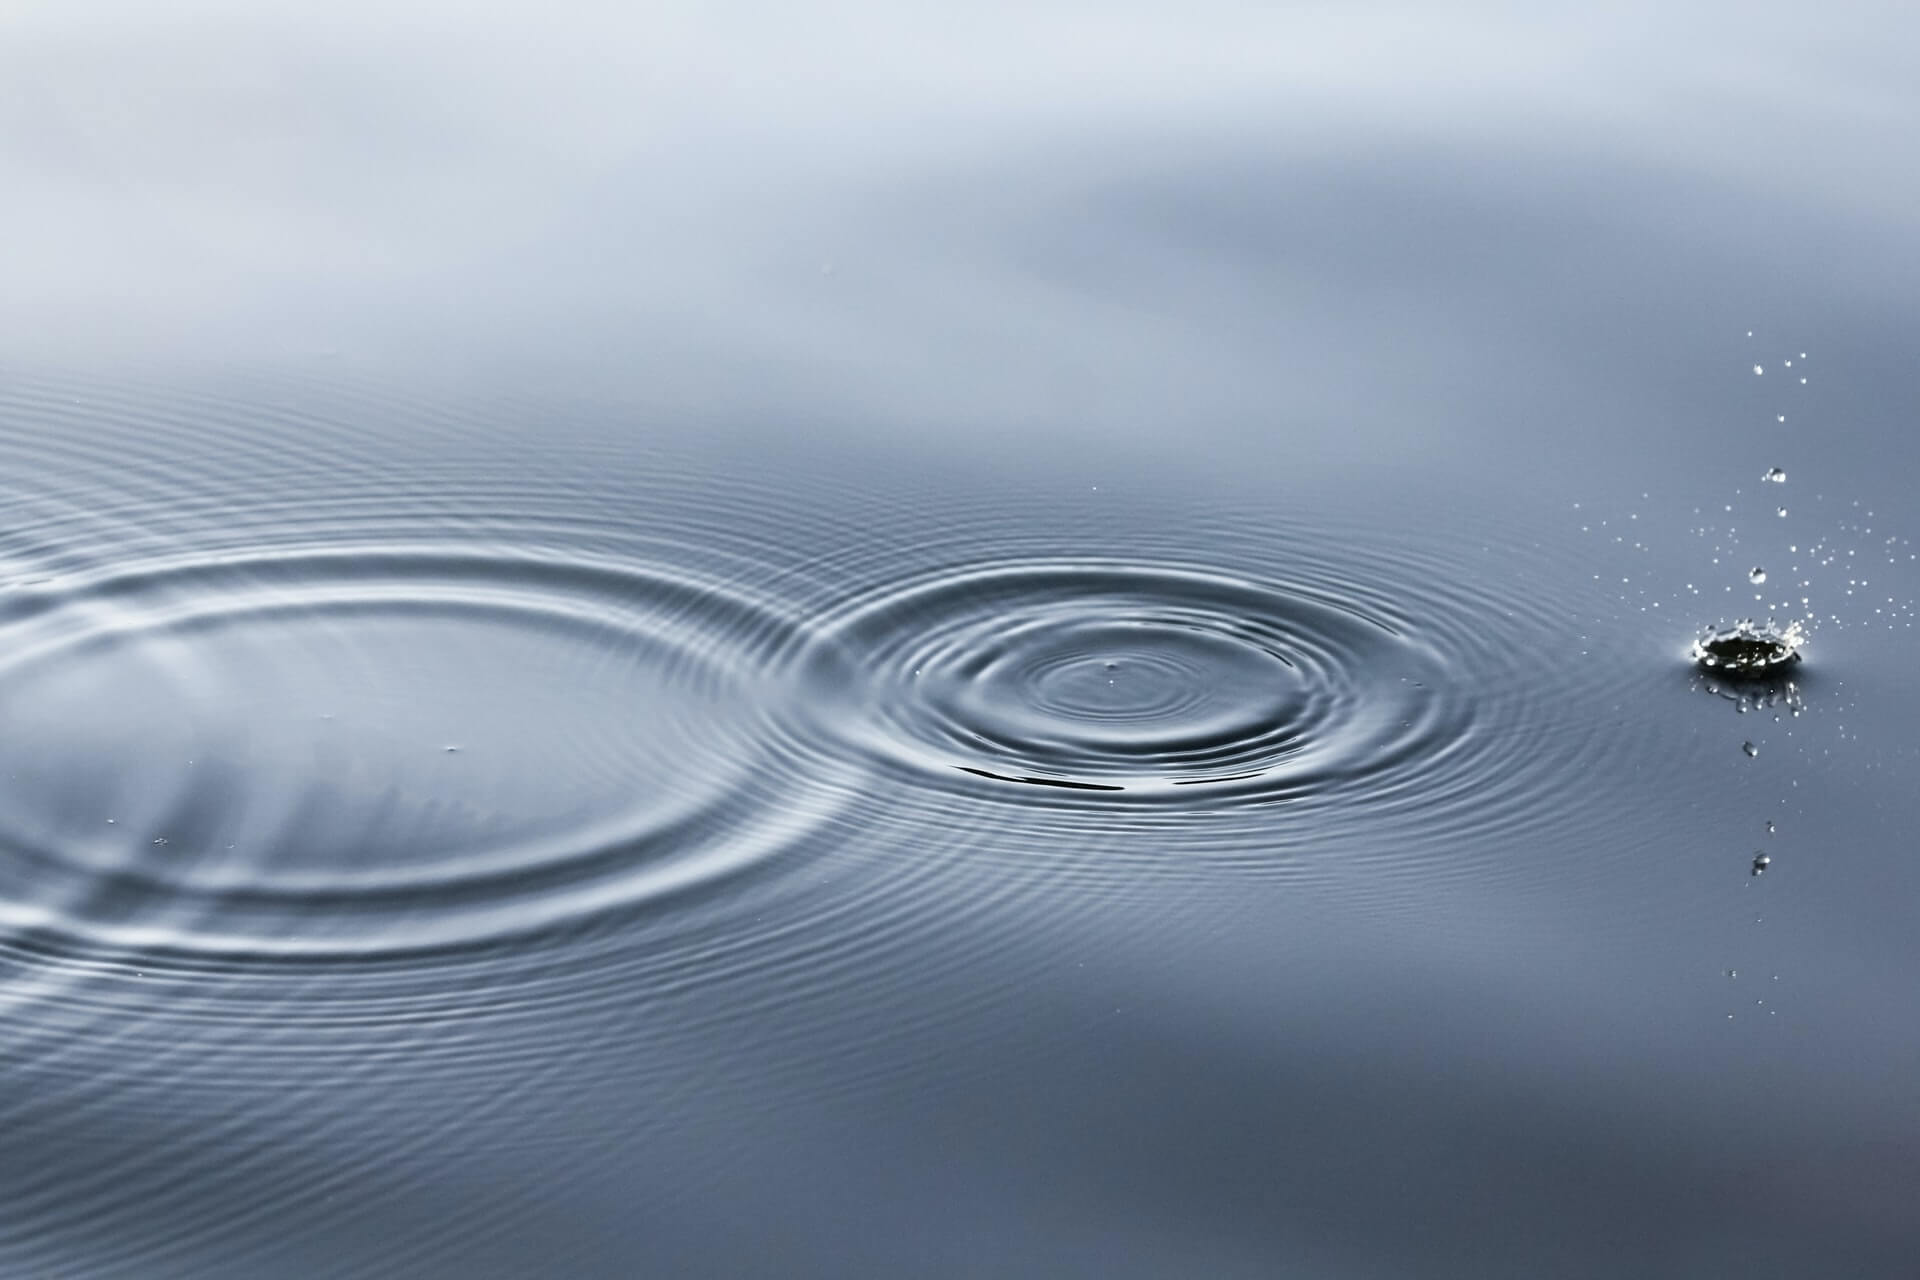 water drops forming patterns on the surface